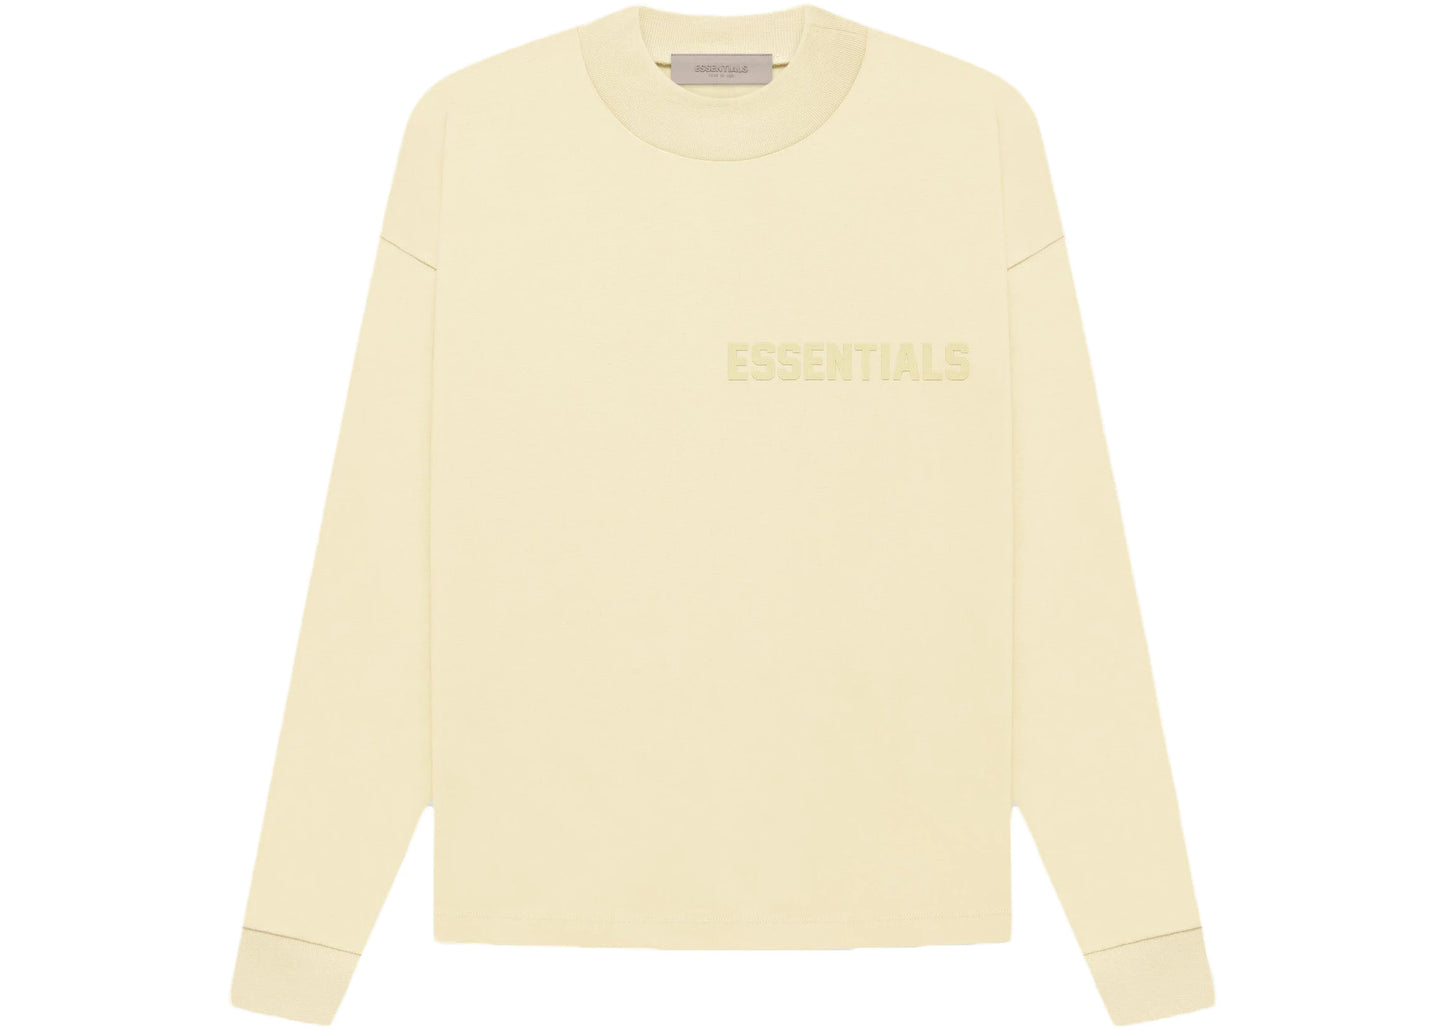 Fear of God Essentials L/S T-shirt Canary